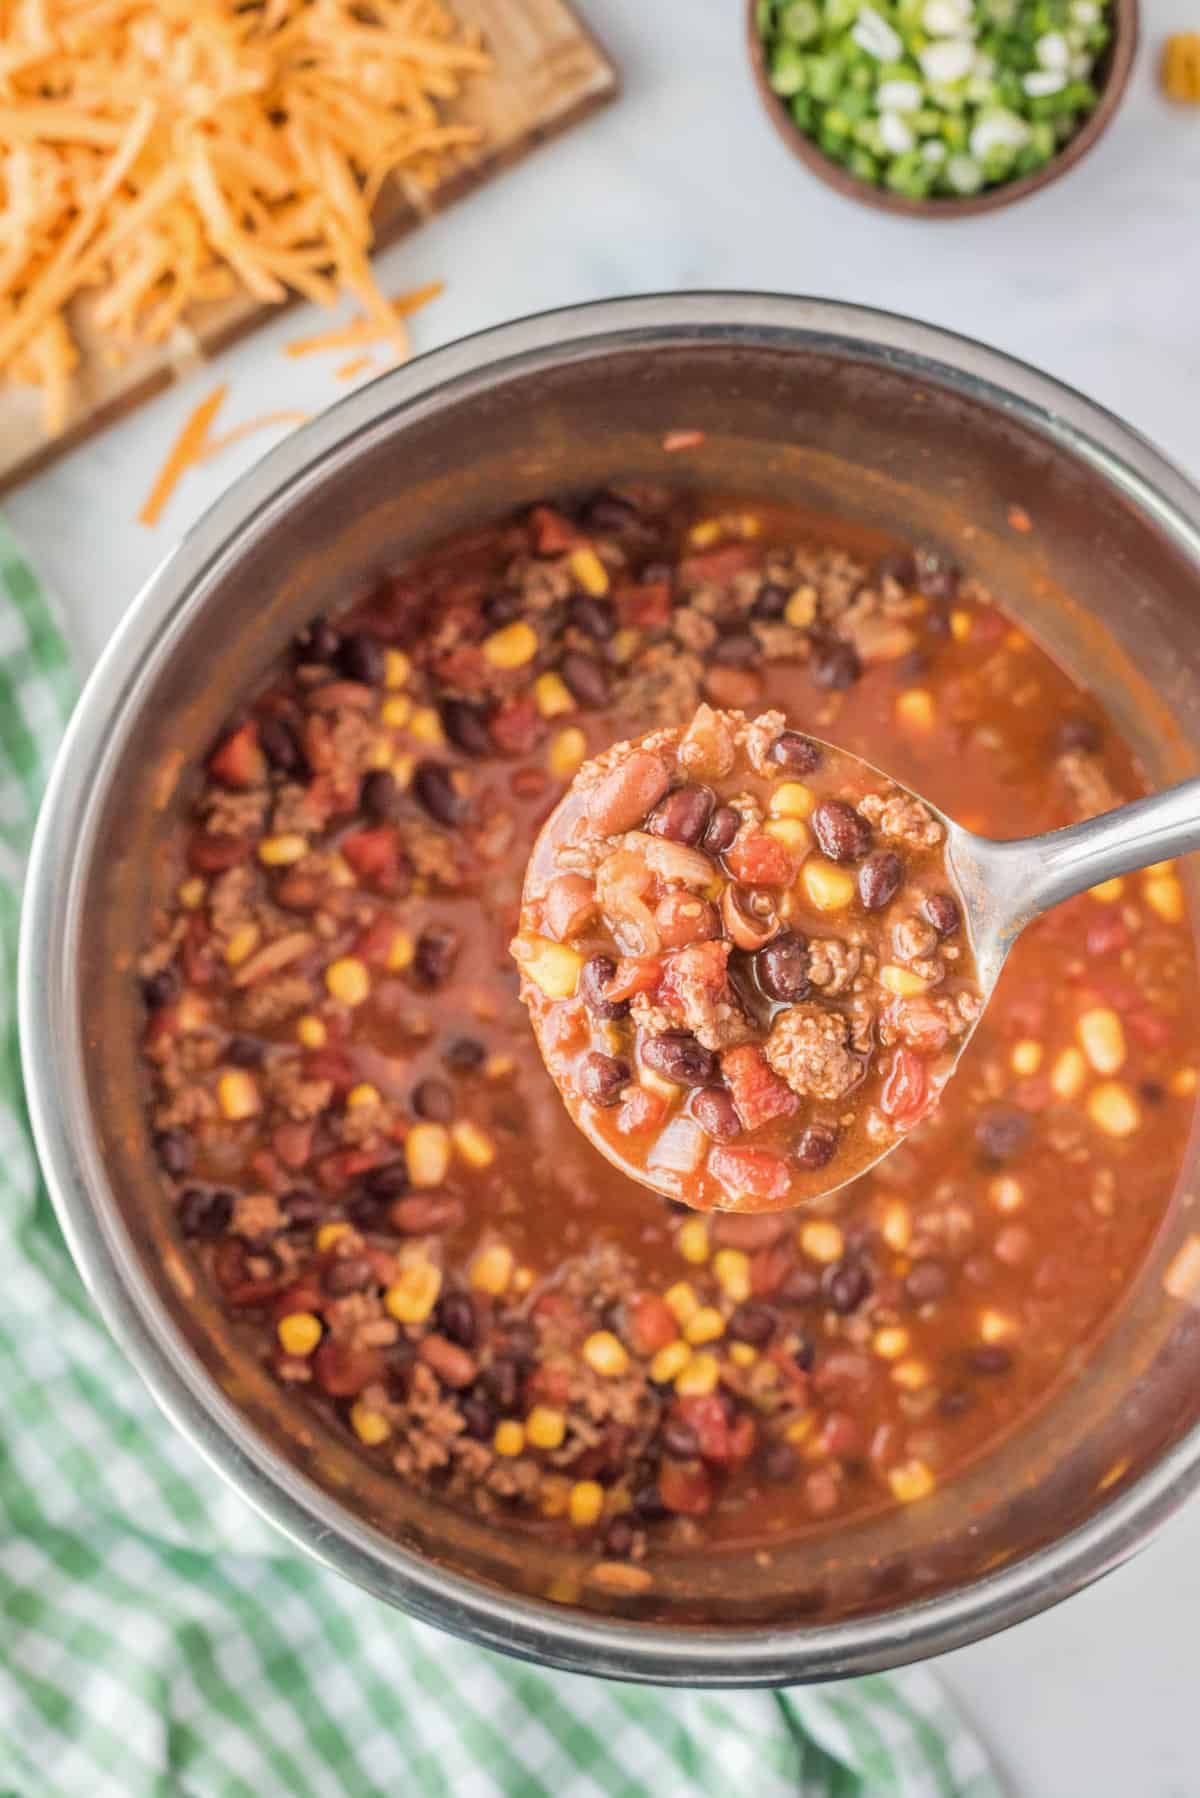 Ladeling The Soup from the Pressure Cooker for Instant Pot Beef Taco Soup